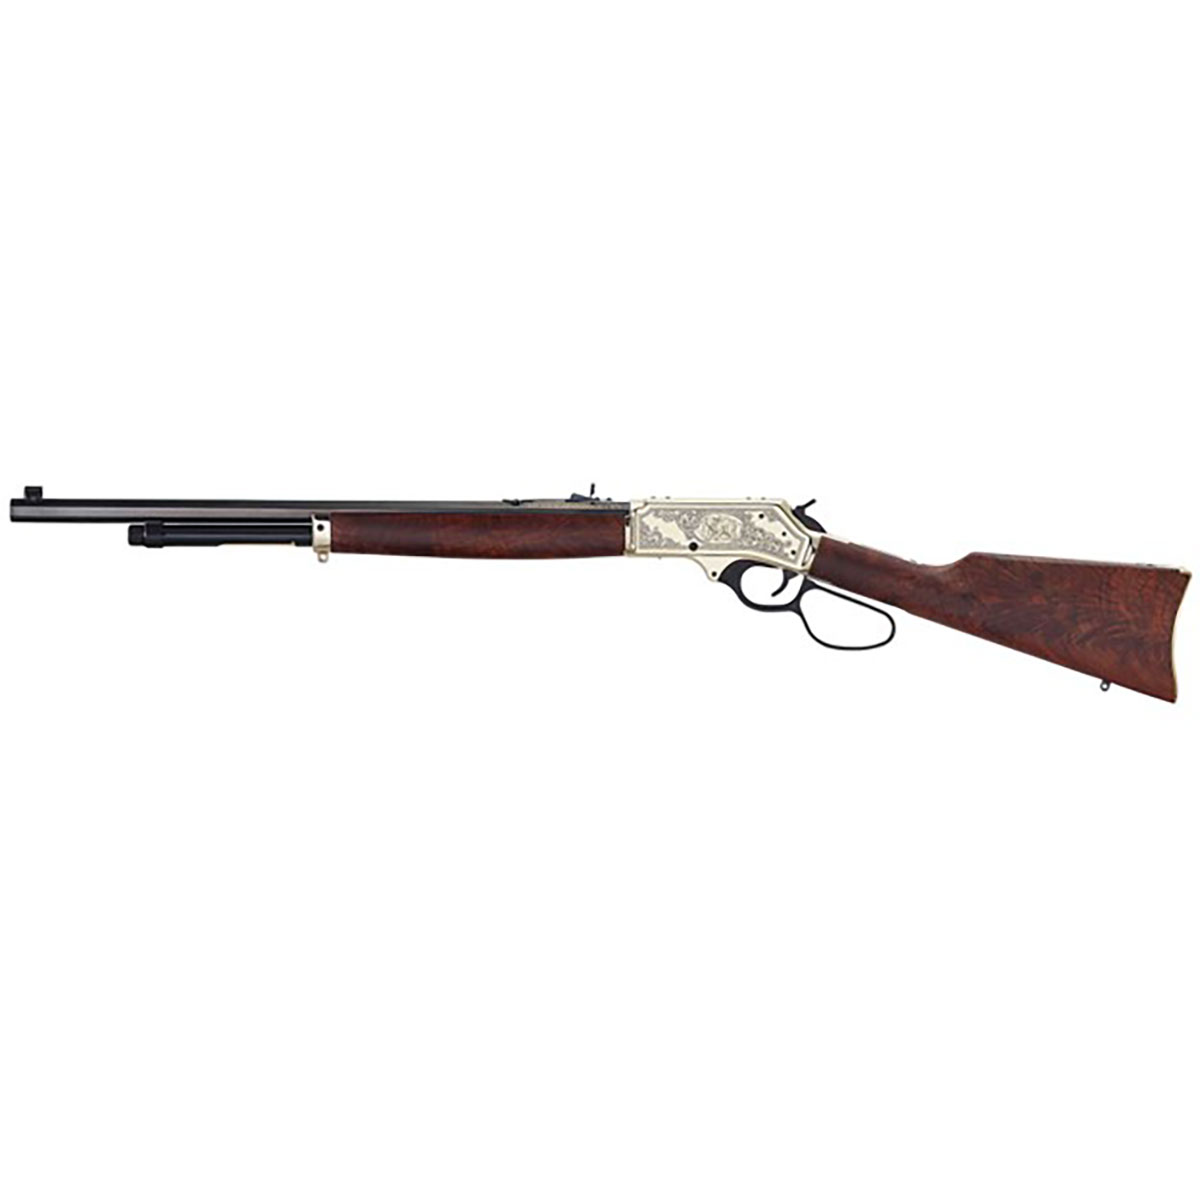 HENRY REPEATING ARMS - BRASS WILDLIFE EDITION 30-30 WINCHESTER LEVER ACTION RIFLE